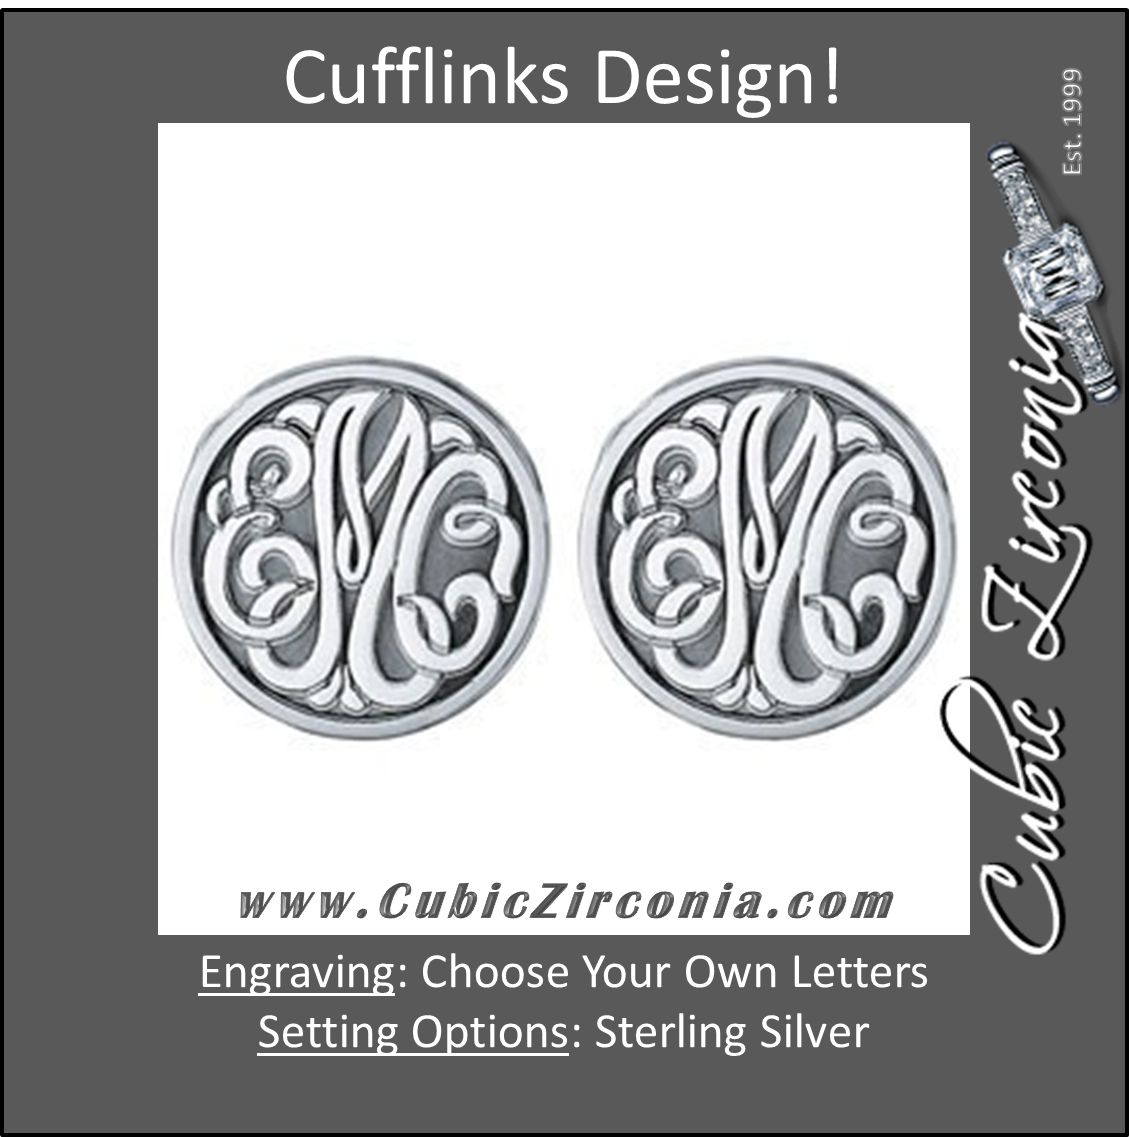 Men's Cufflinks- Customizable Monogram, Circle Style with Fancy Carved Relief Letters